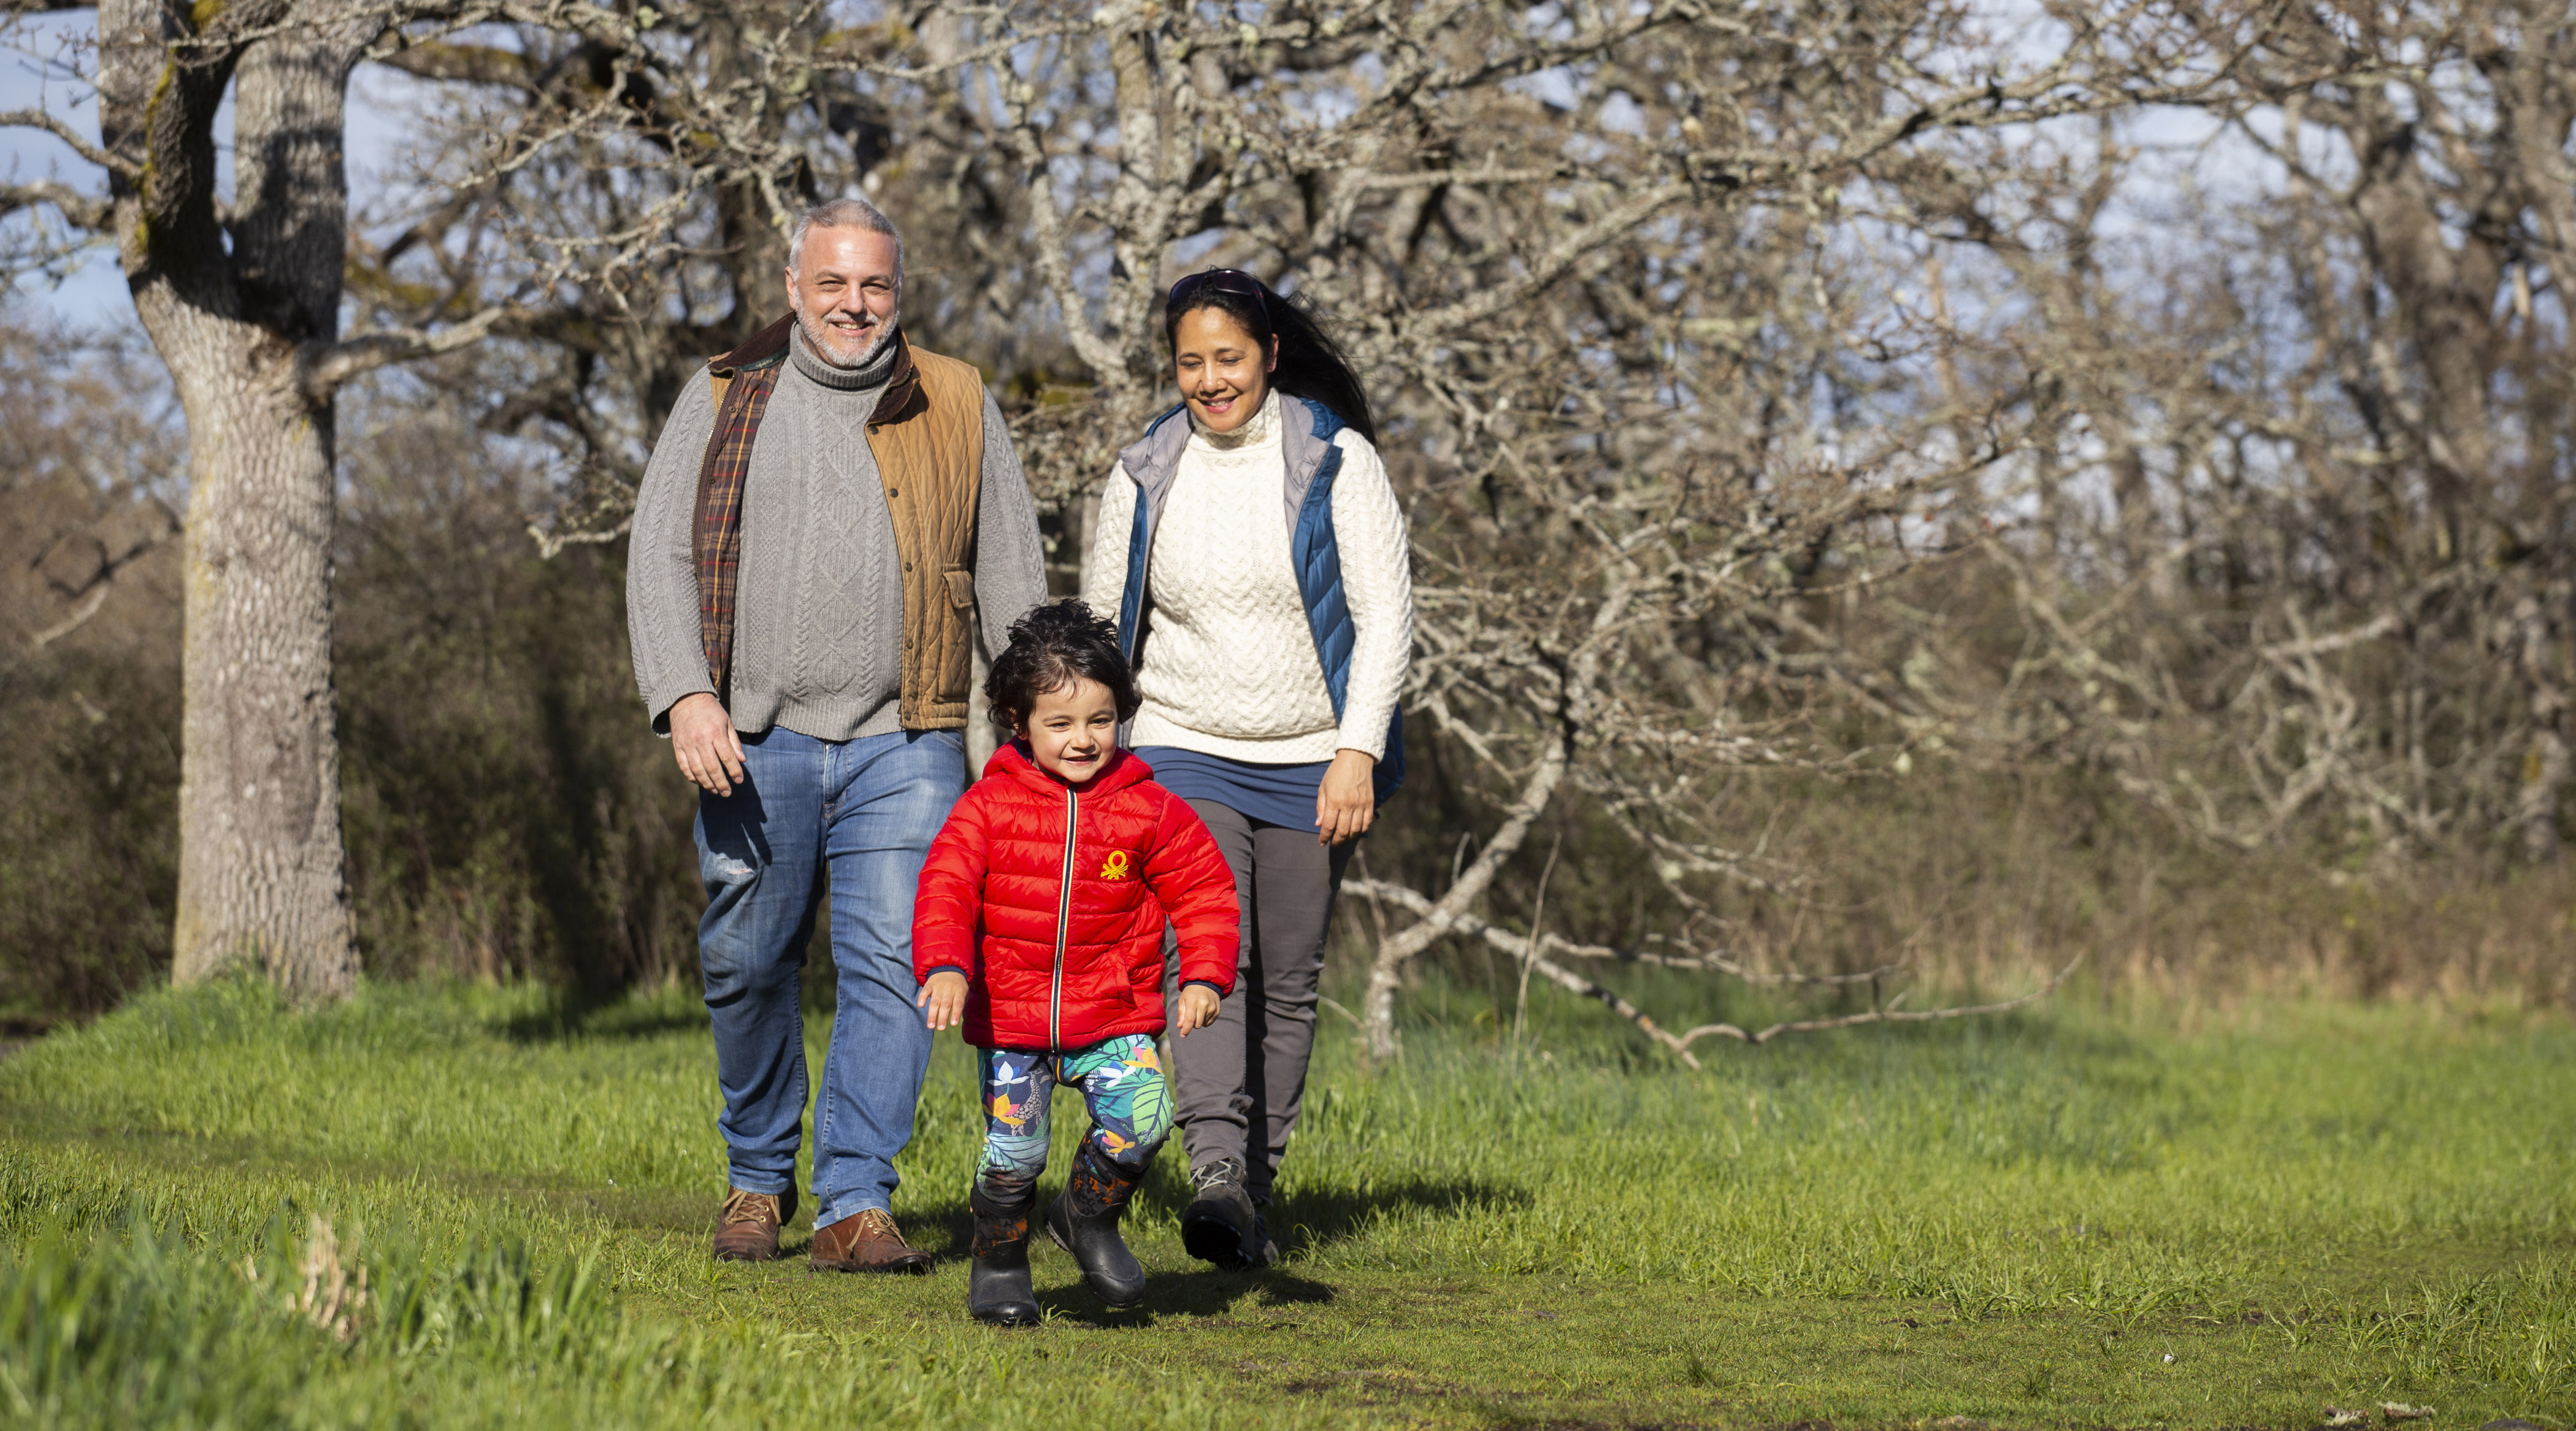 A man, woman, and small child walk in a nature park surrounded by bare trees.